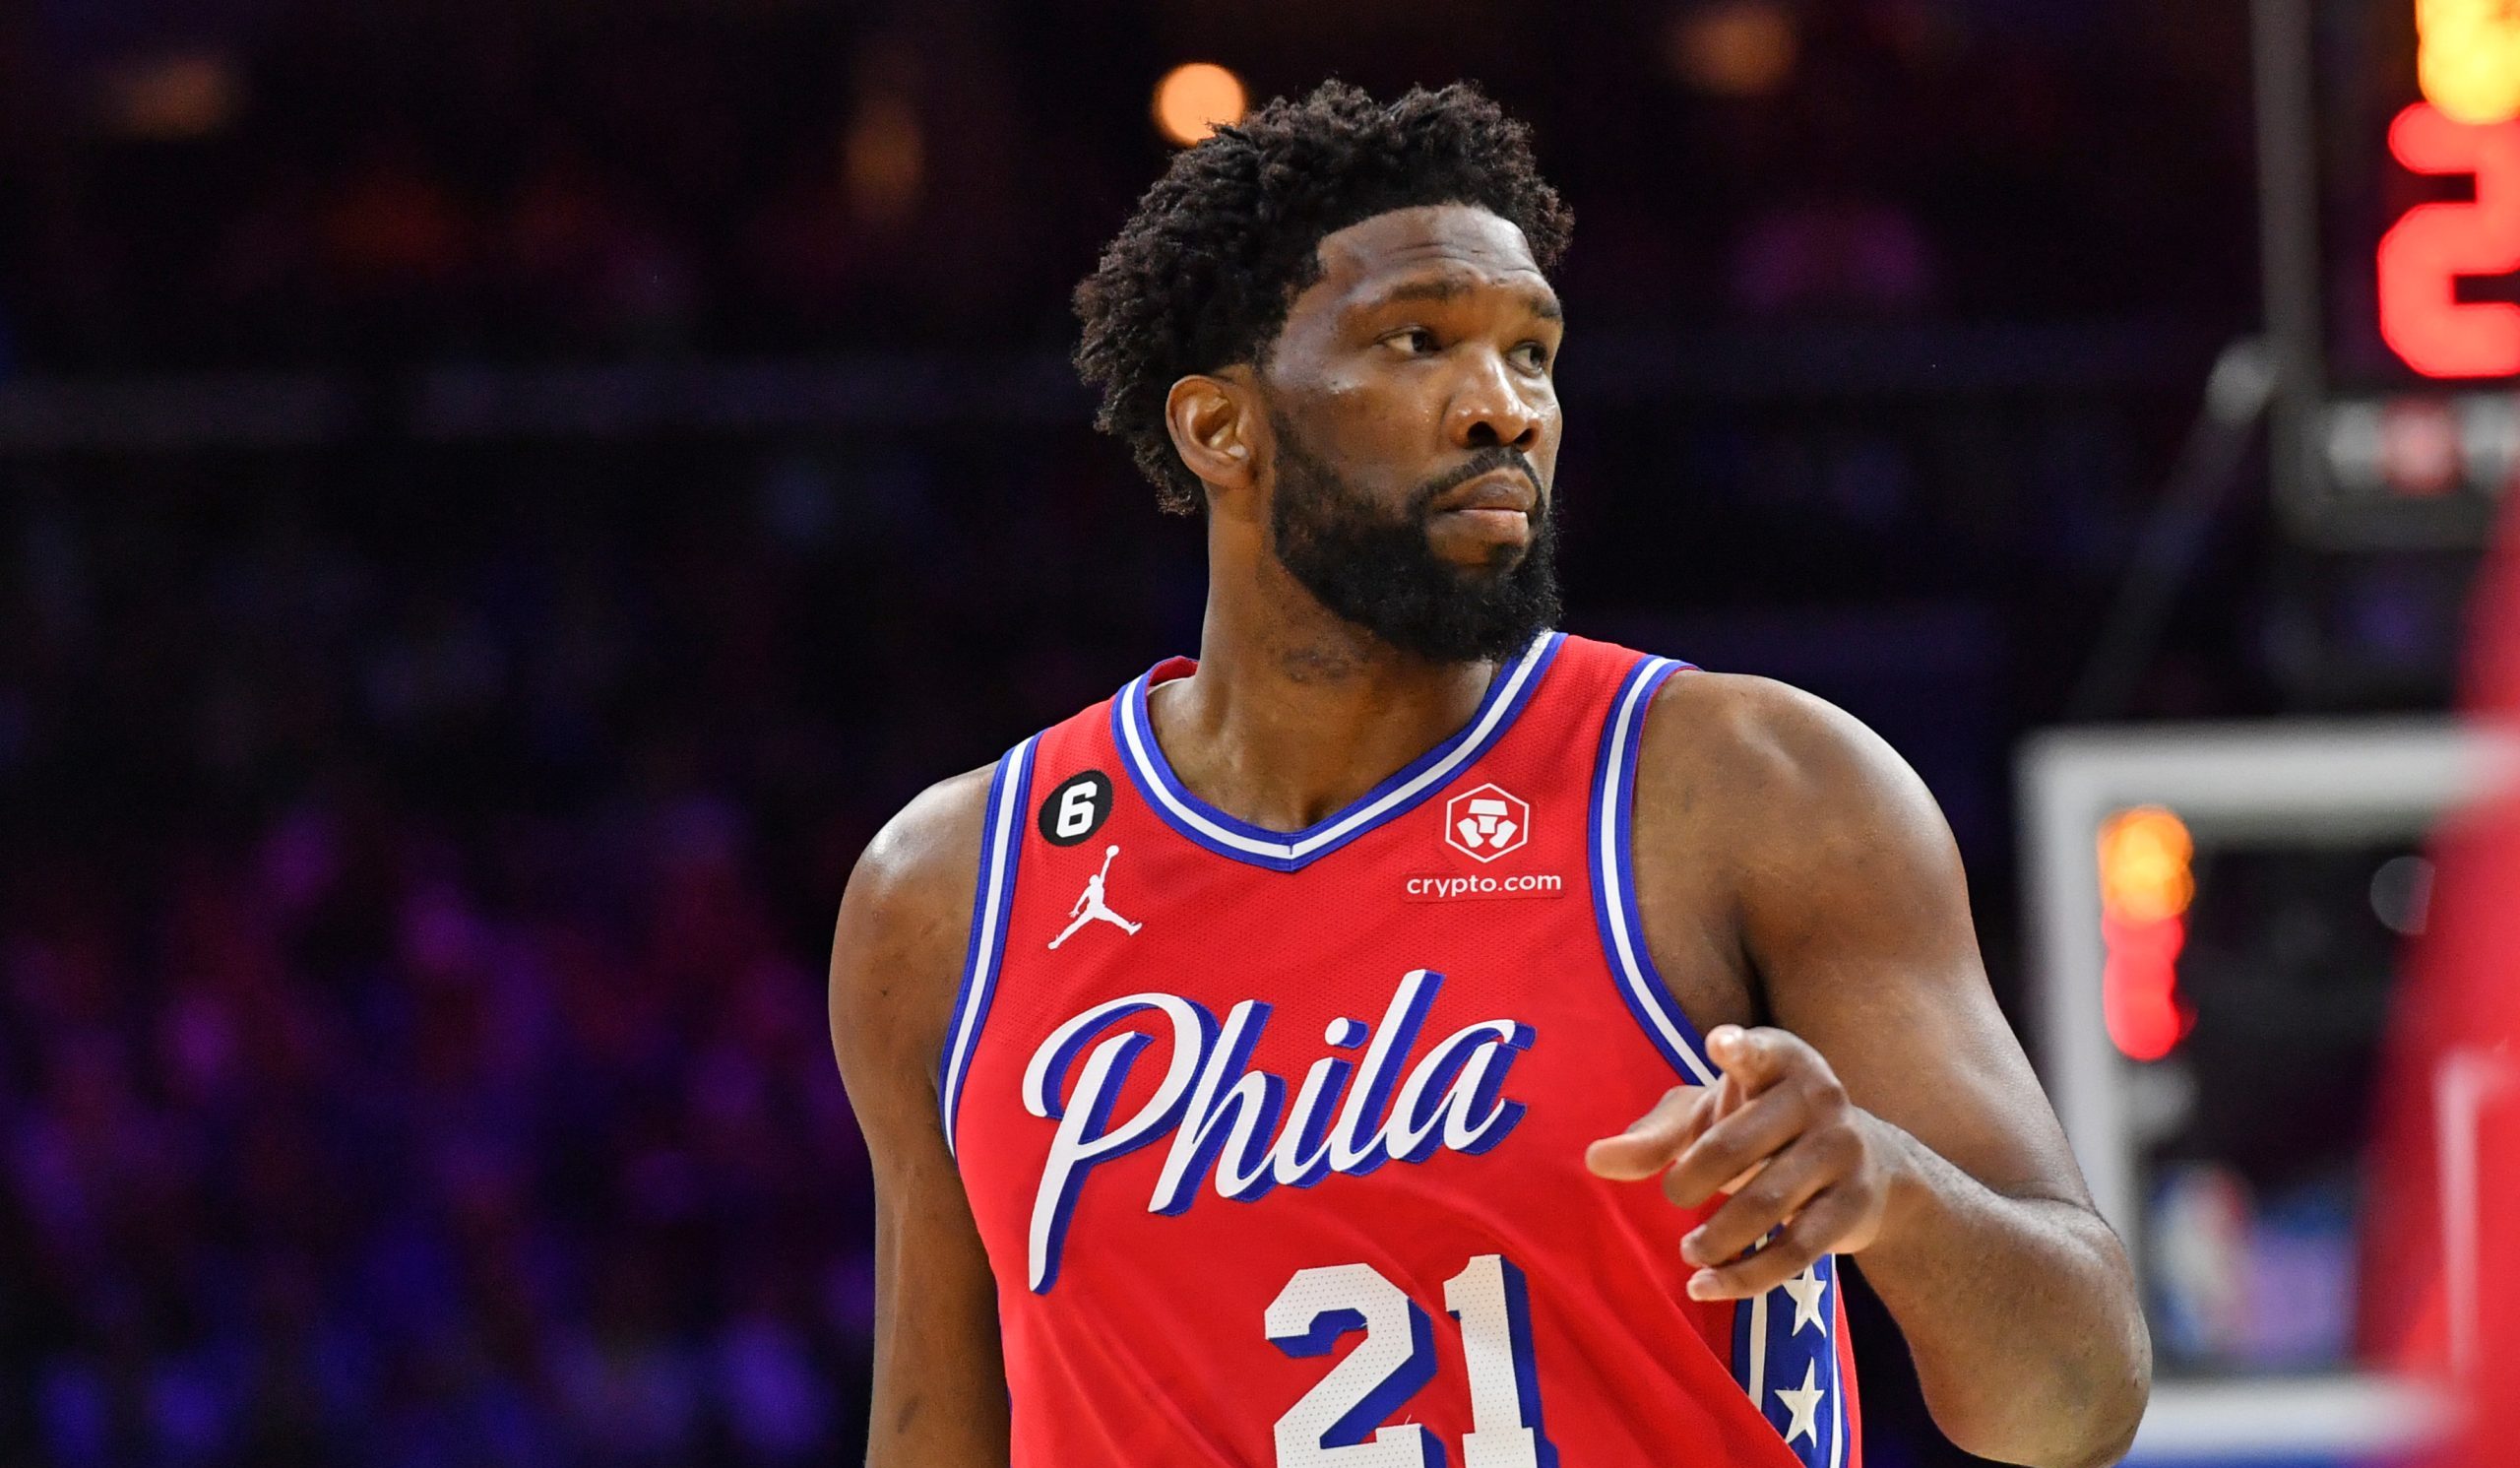 Joel Embiid, seen here in the playoffs, reportedly wants to stay with the 76ers for his entire career. Photo credit: Eric Hartline-USA TODAY Sports